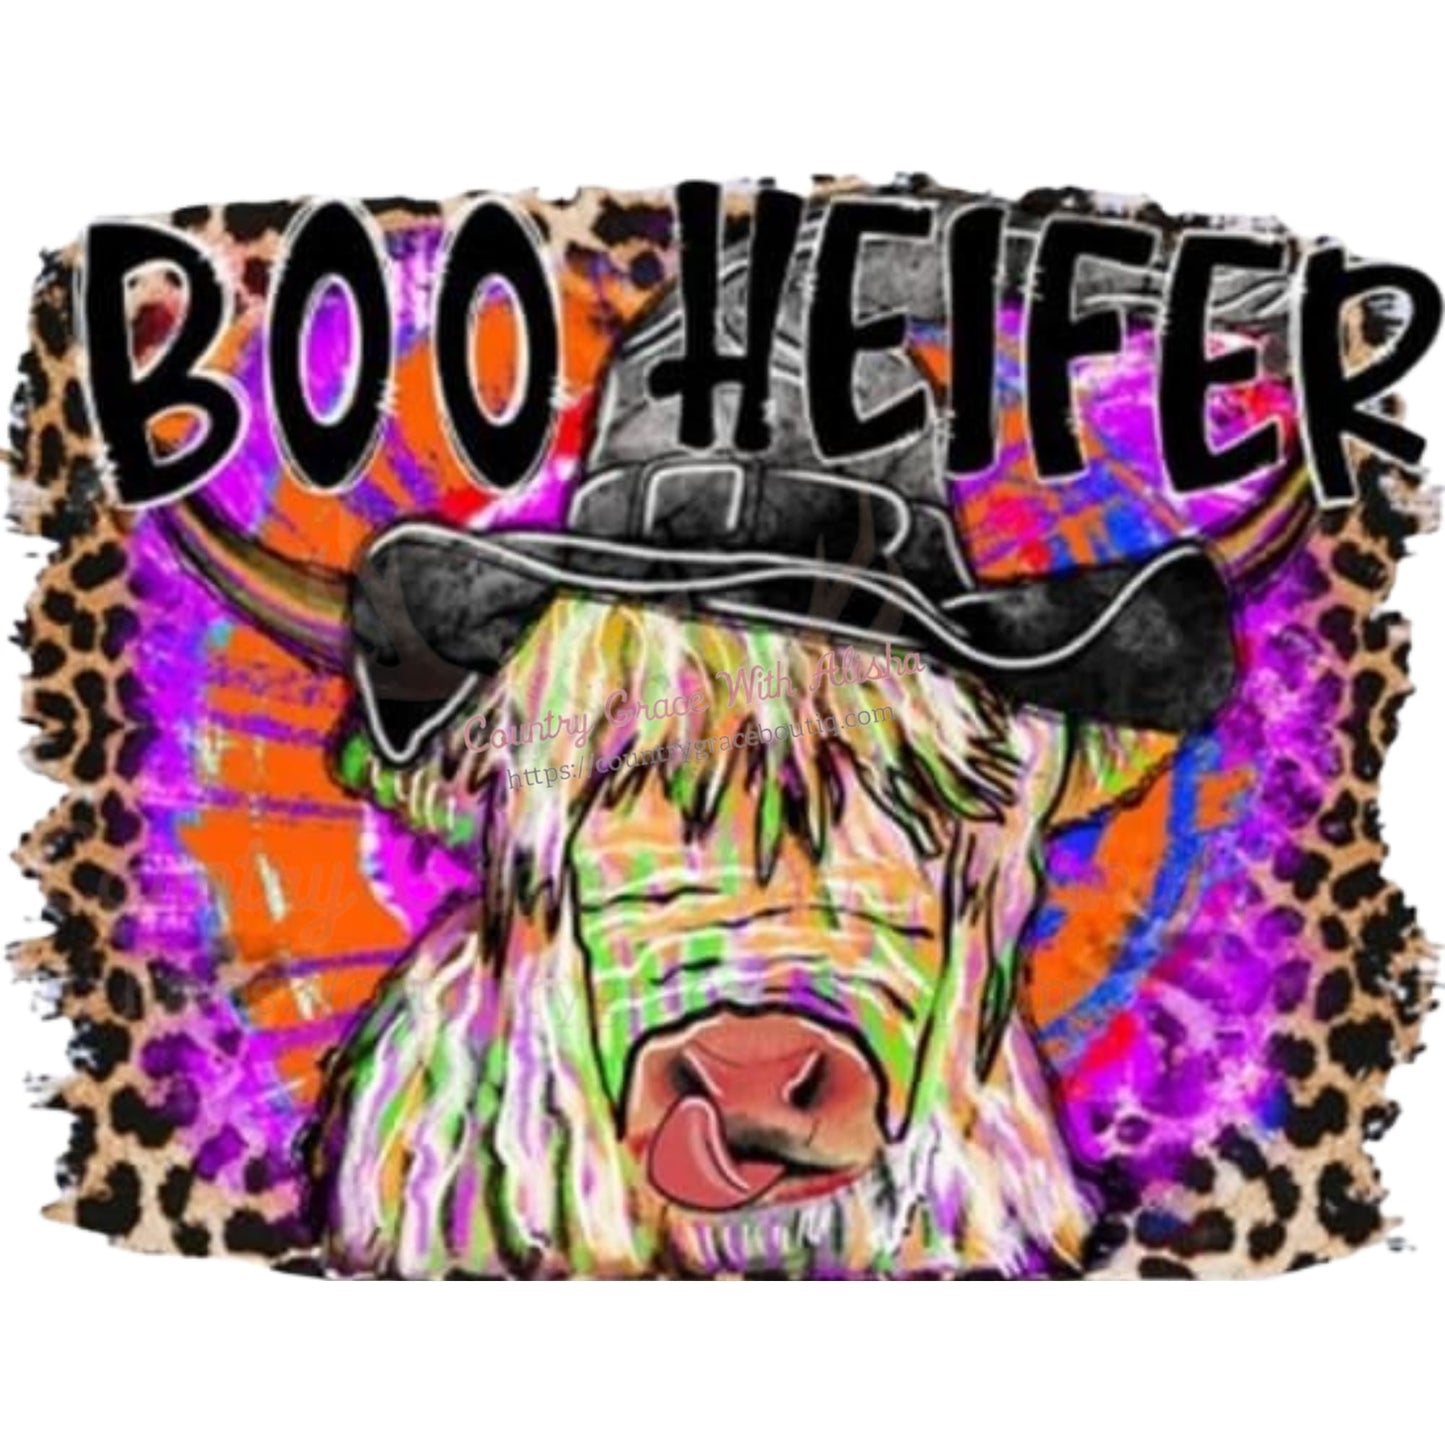 Boo Heifer Sublimation Transfer - Sub $1.50 Country Grace 